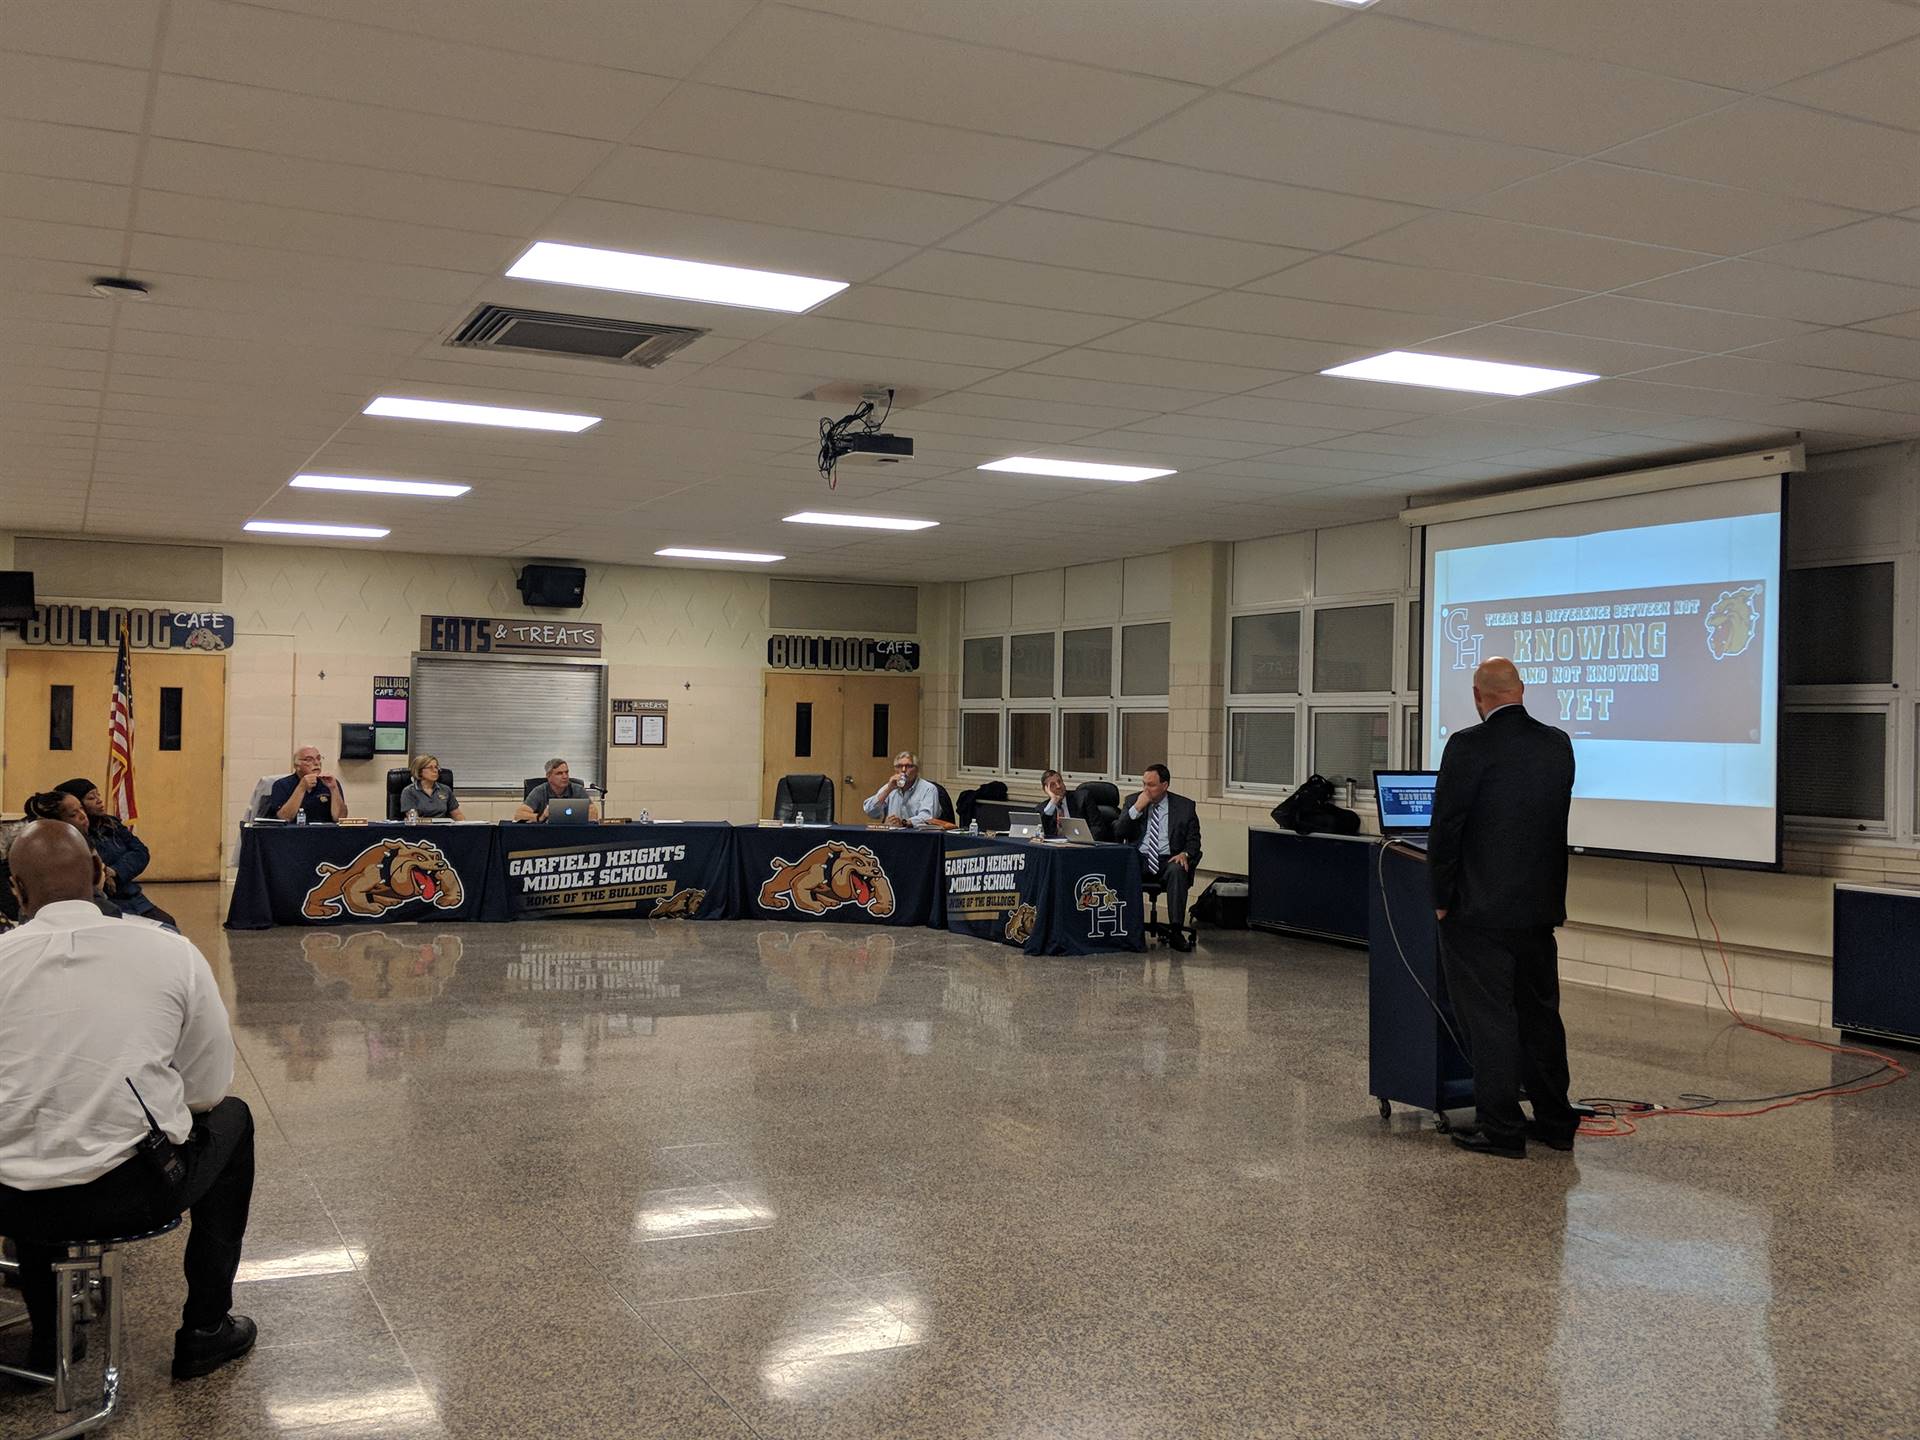 Chris Sauer presenting to the board of education